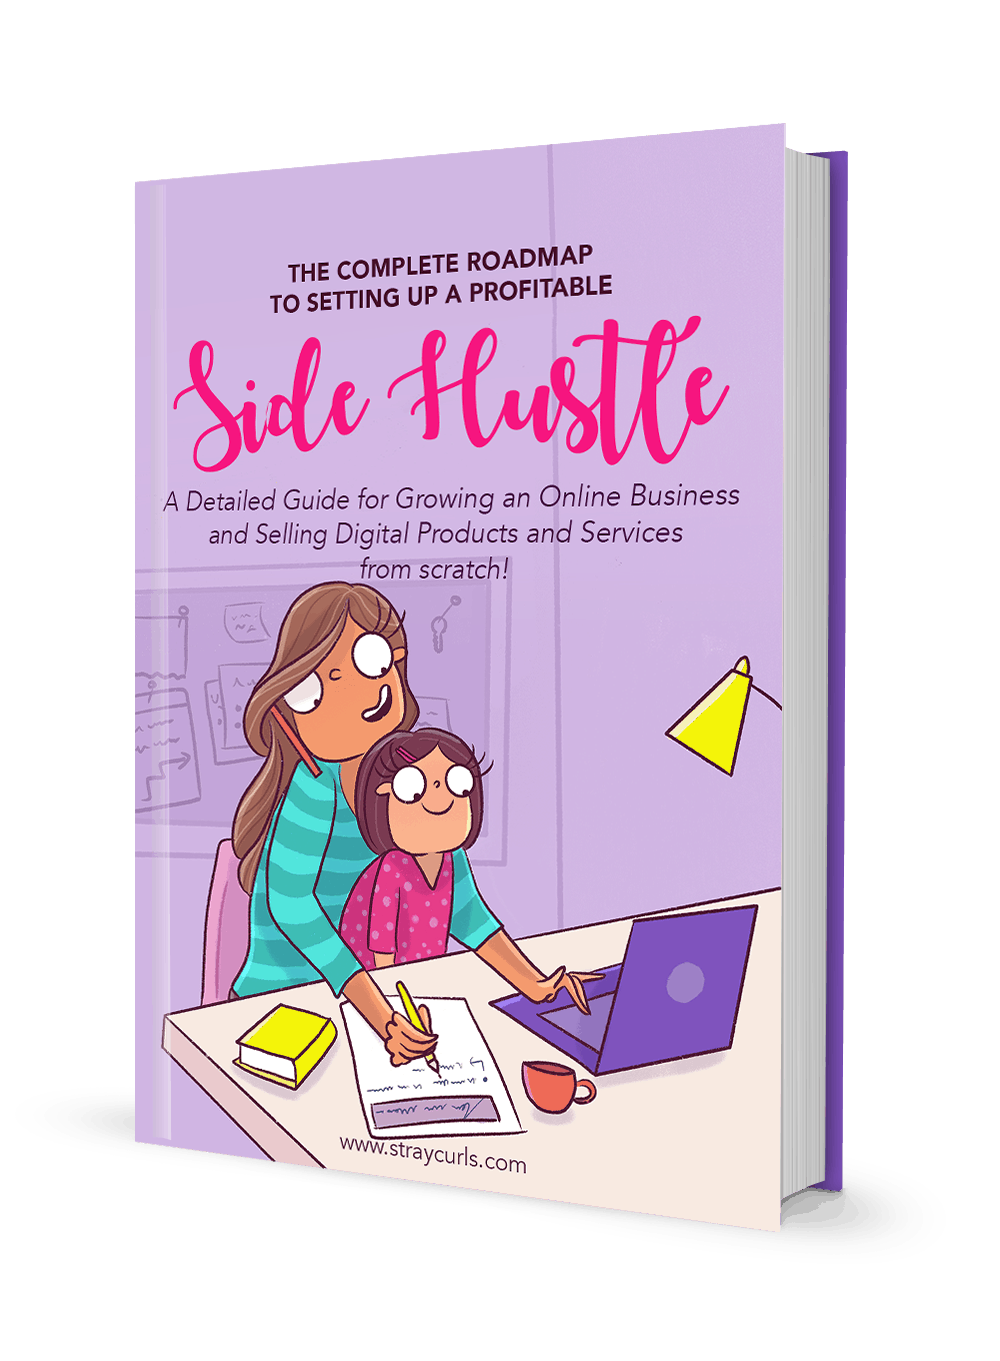 This eBook conains all the best side hustles of 2019, the exact way to start and grow an online business from scratch and sell products and services using nothing except your Blog.